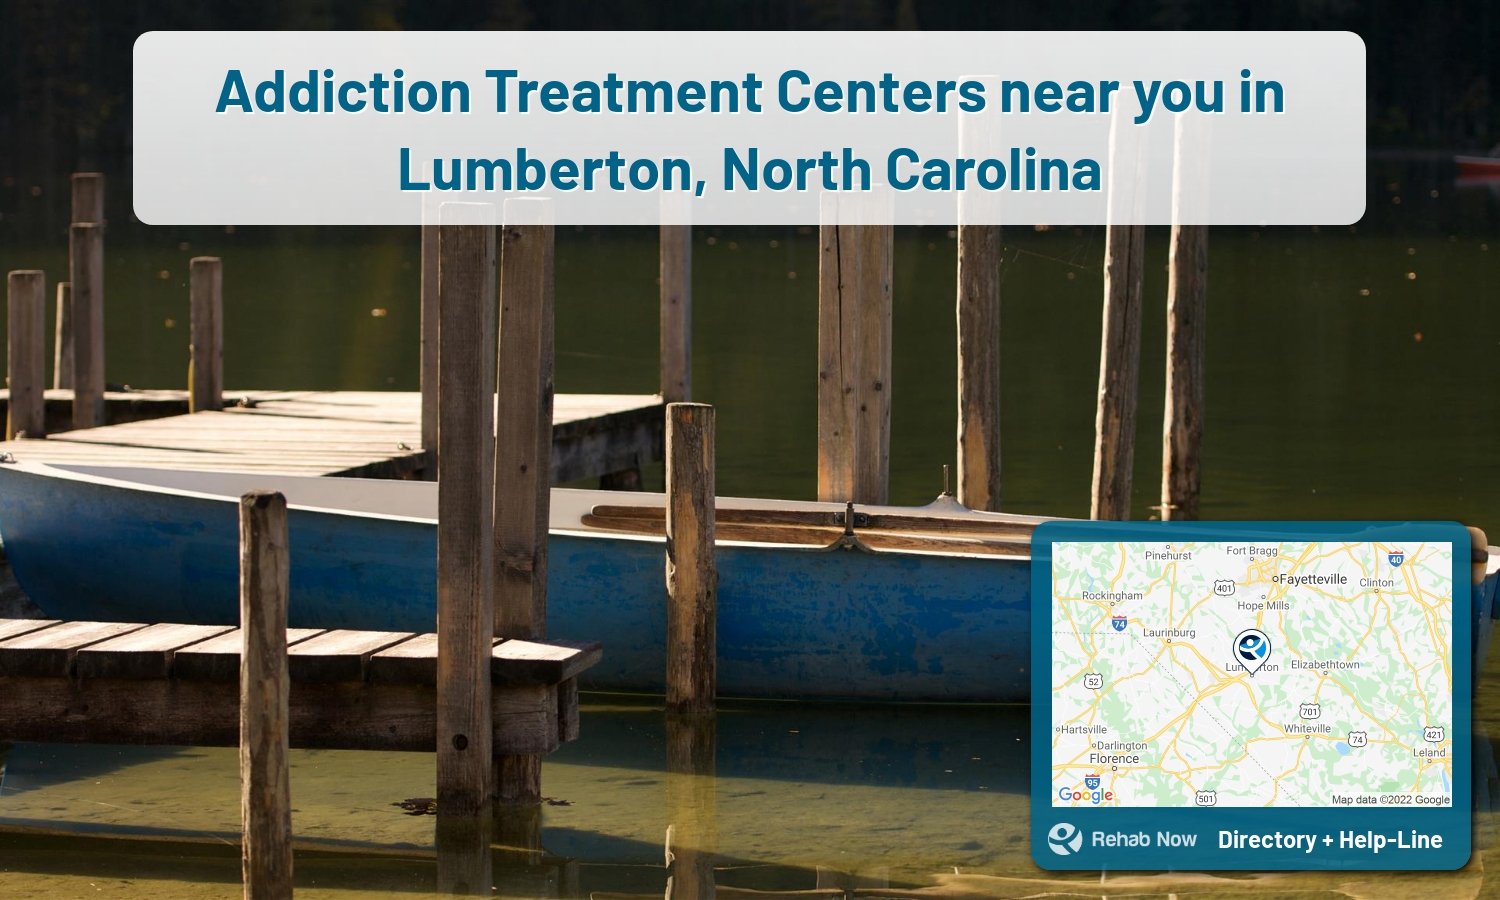 View options, availability, treatment methods, and more, for drug rehab and alcohol treatment in Lumberton, North Carolina